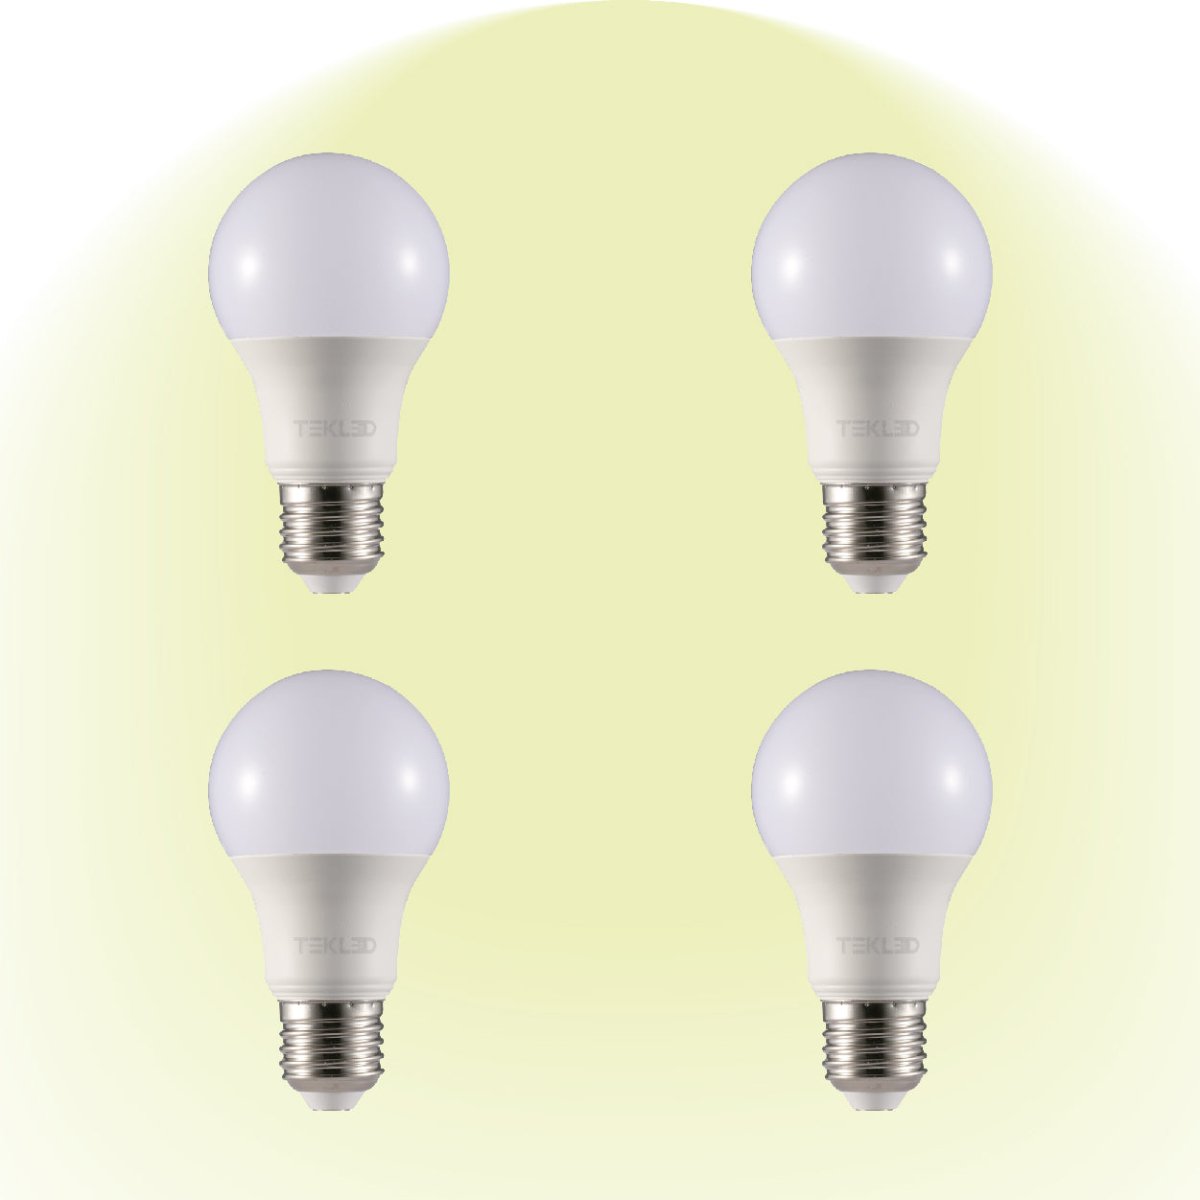 Virgo LED GLS Bulb A60 Dimmable E27 Edison Screw 4000K Cool White 12 W Pack of 4 527-156344